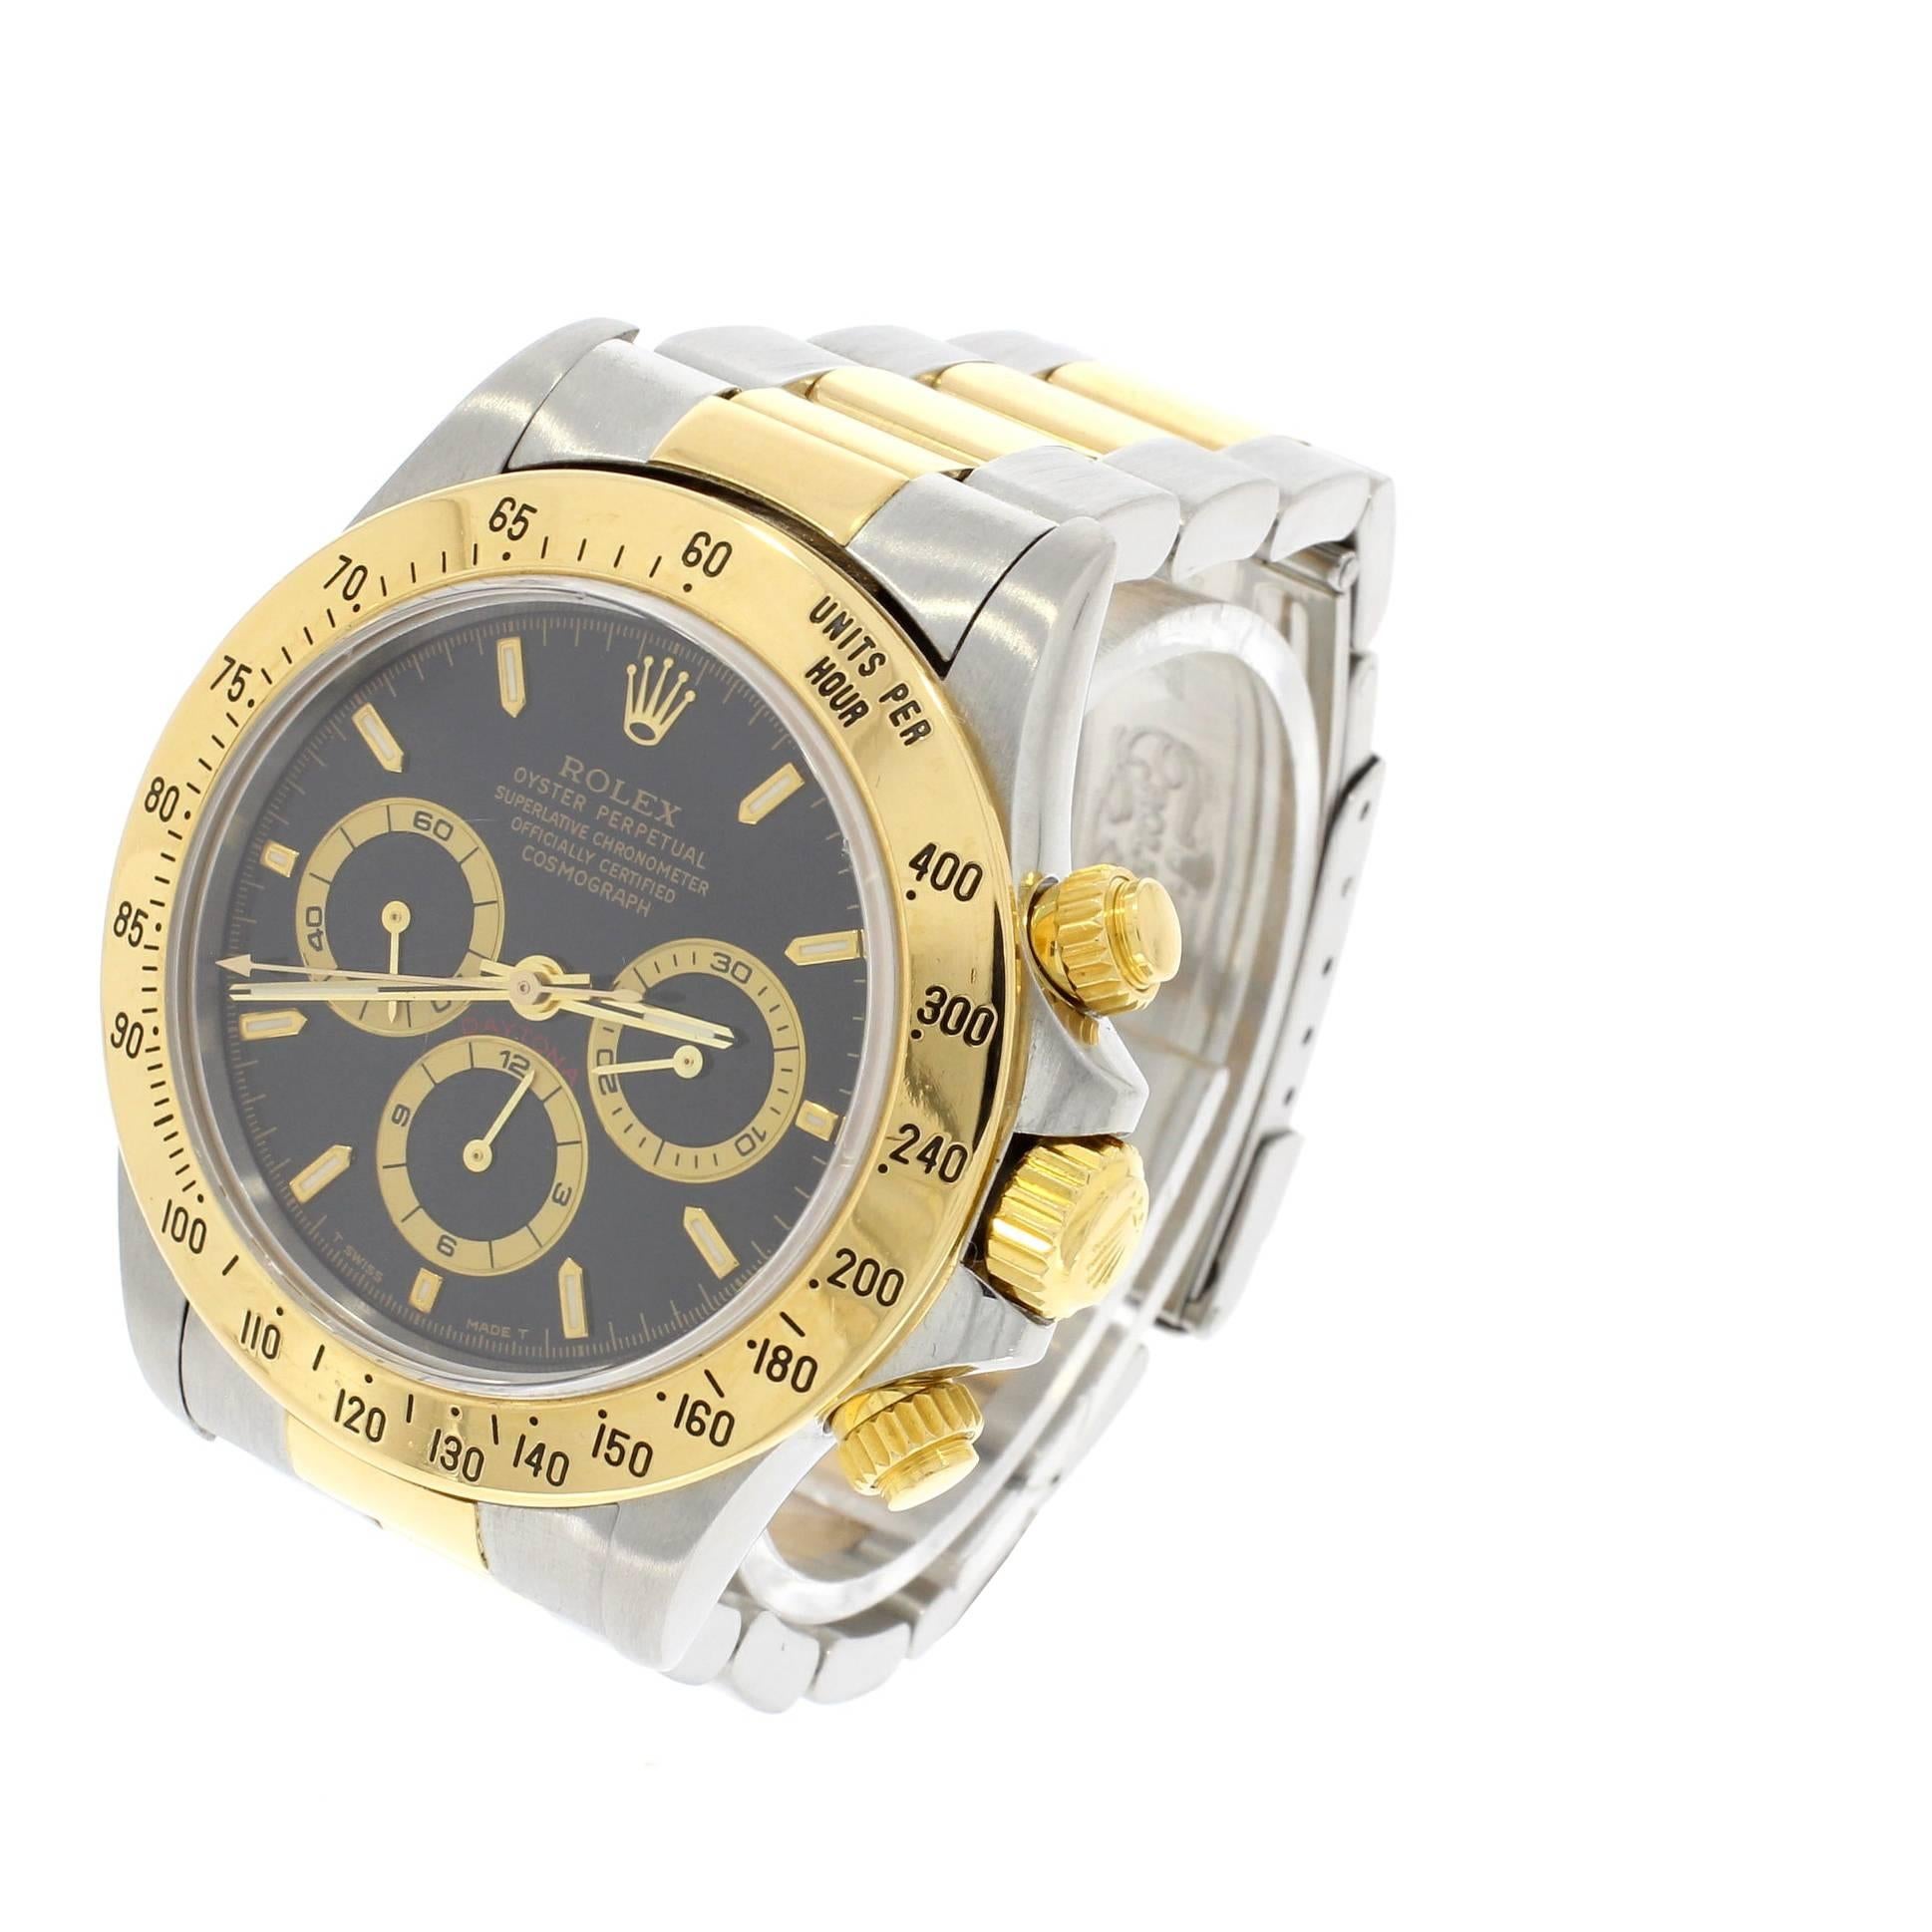 The Rolex Daytona named after a city in Florida which attracted motorsport enthusiasts due to its compacted sand, making it ideal for land speed record attempts.

This Rolex has undergone a thorough inspection to ensure all aspects of the watch are